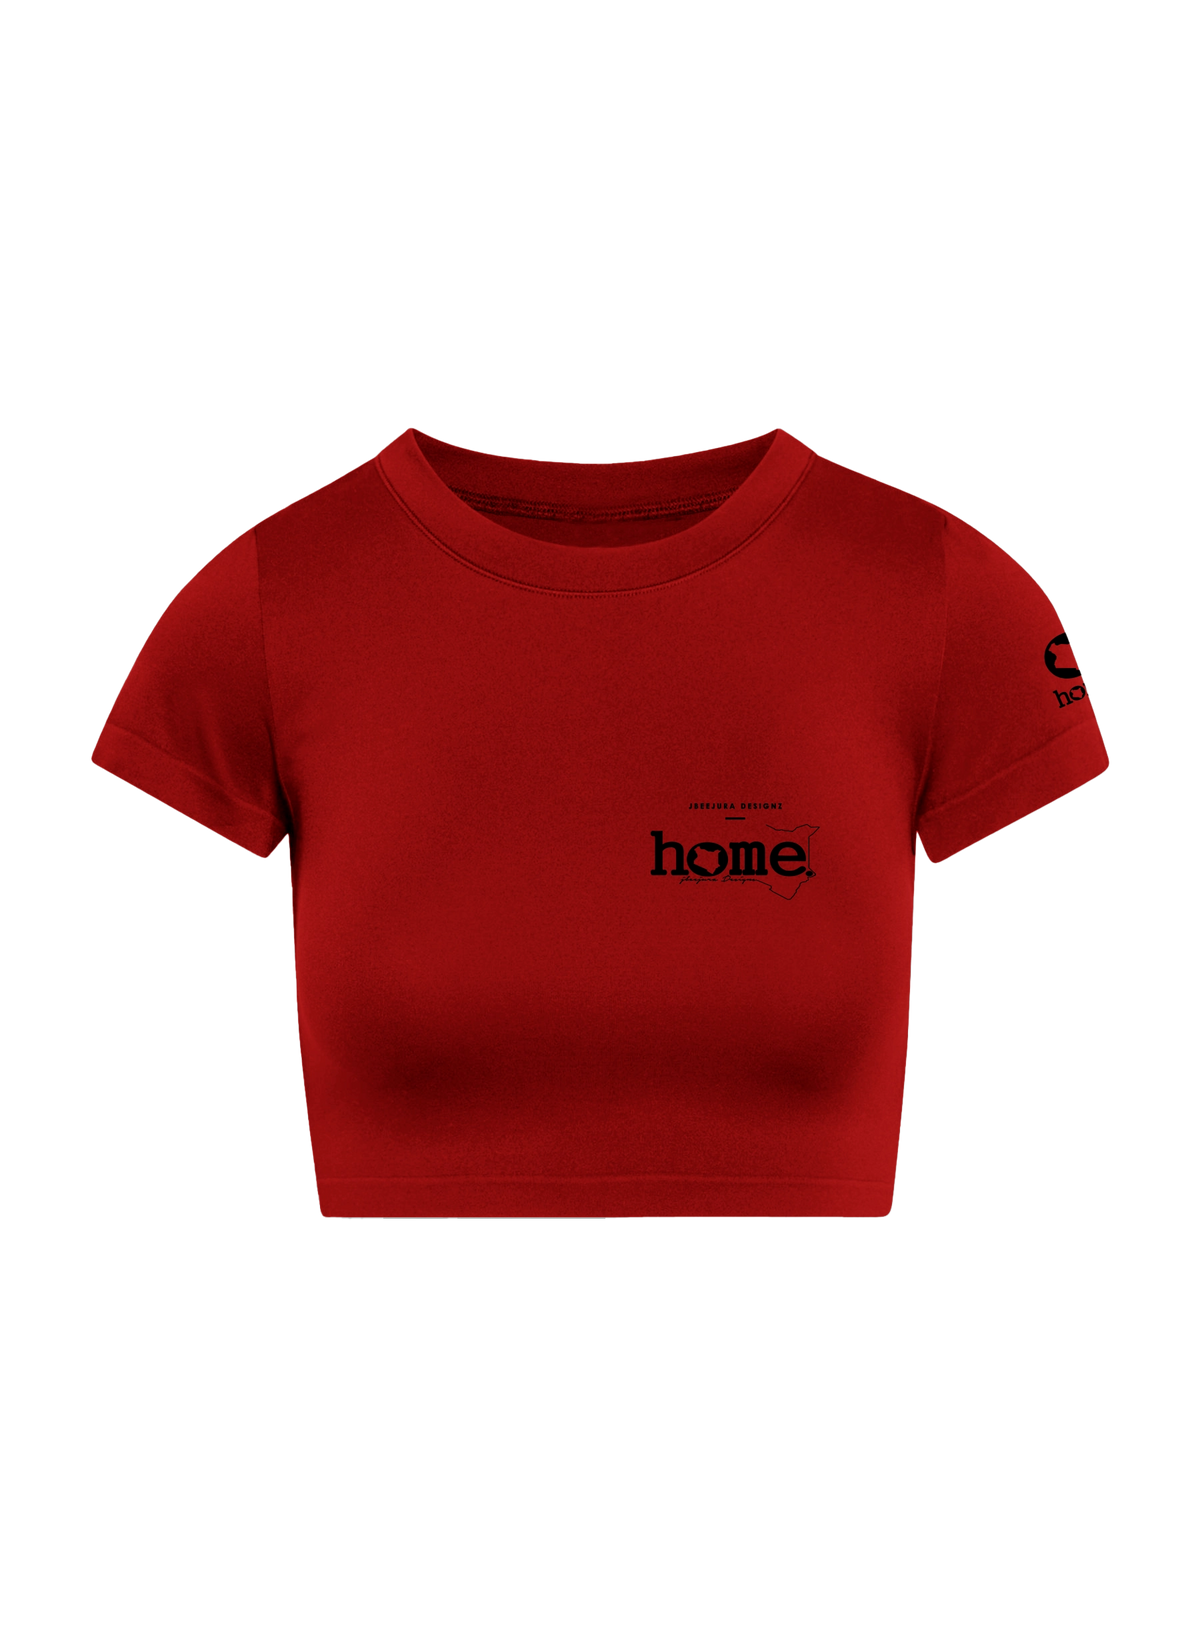 home_254 SHORT SLEEVED RED CROPPED ARIA TEE WITH A BLACK 3D WORDS PRINT 